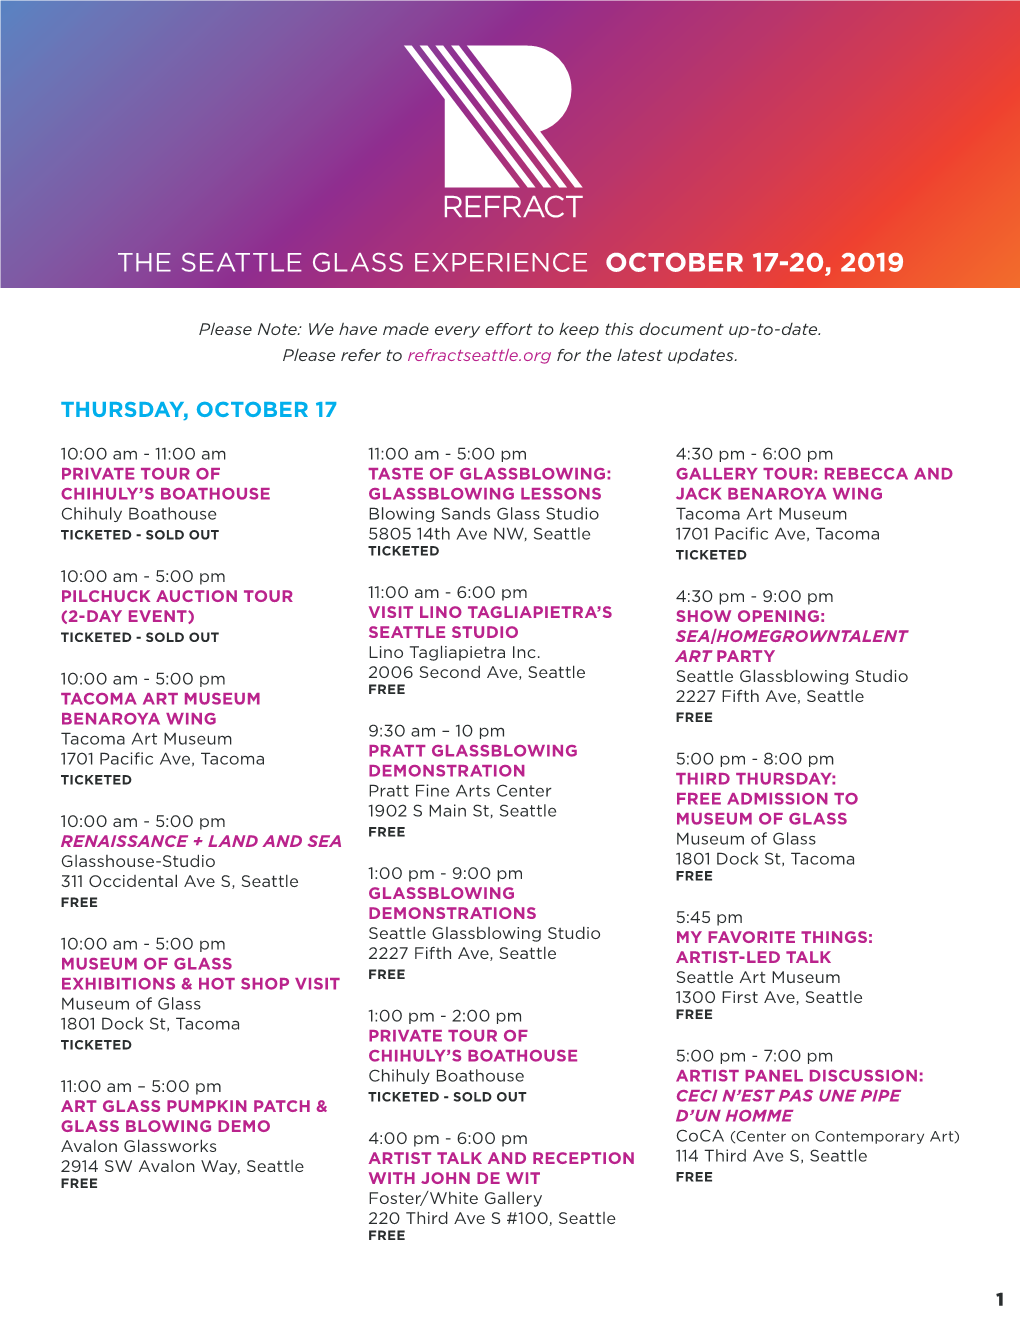 The Seattle Glass Experience October 17-20, 2019